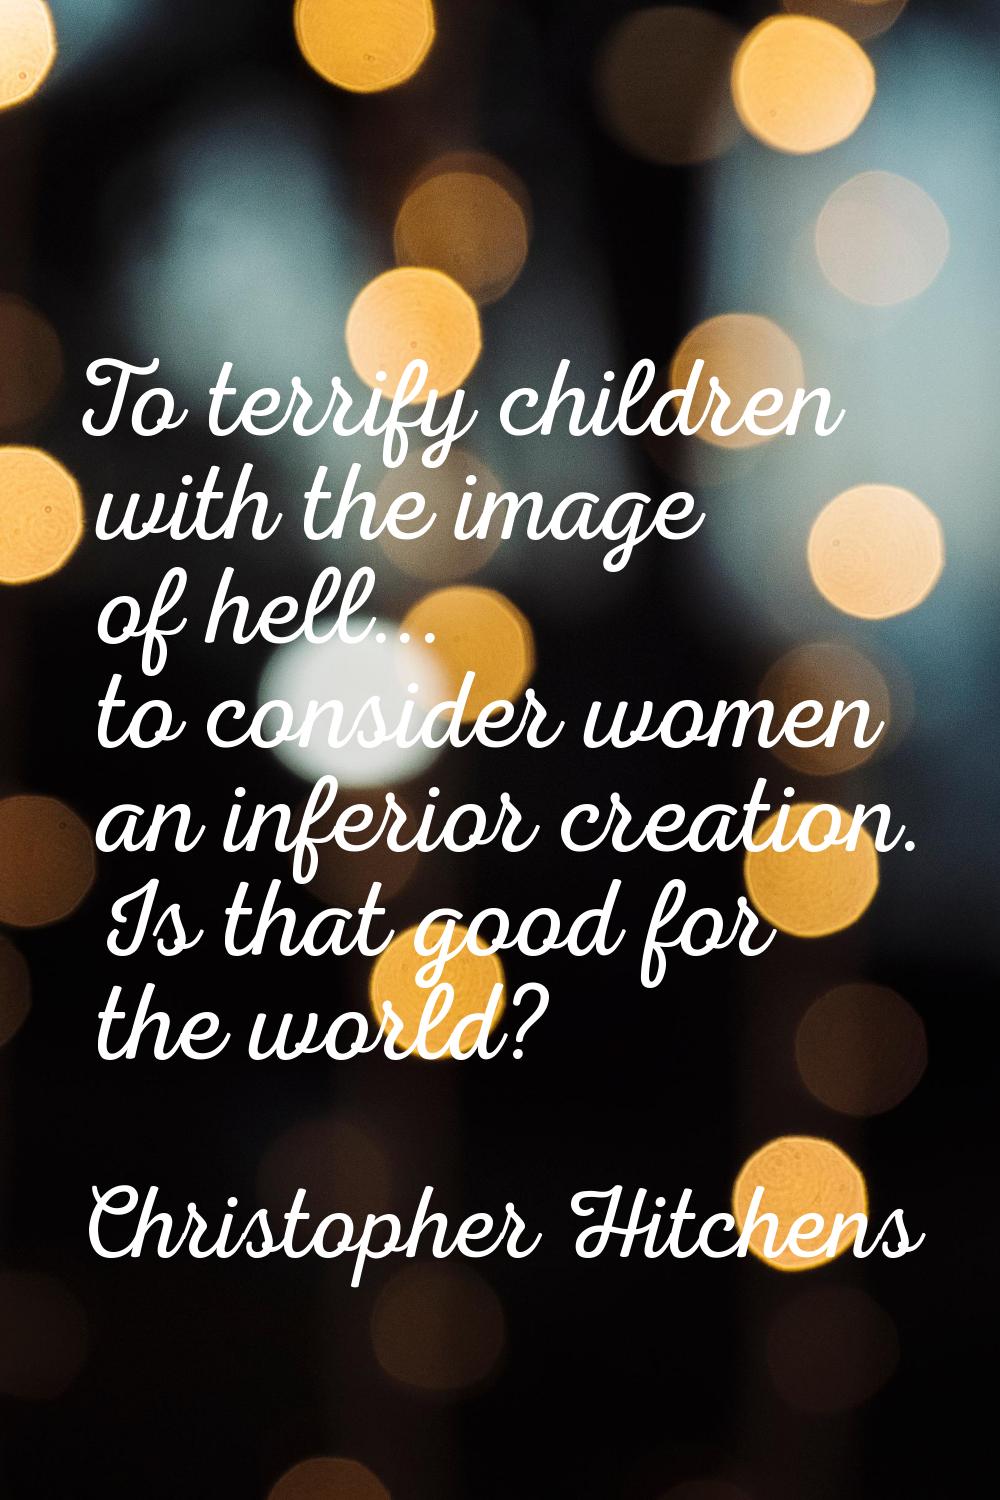 To terrify children with the image of hell... to consider women an inferior creation. Is that good 